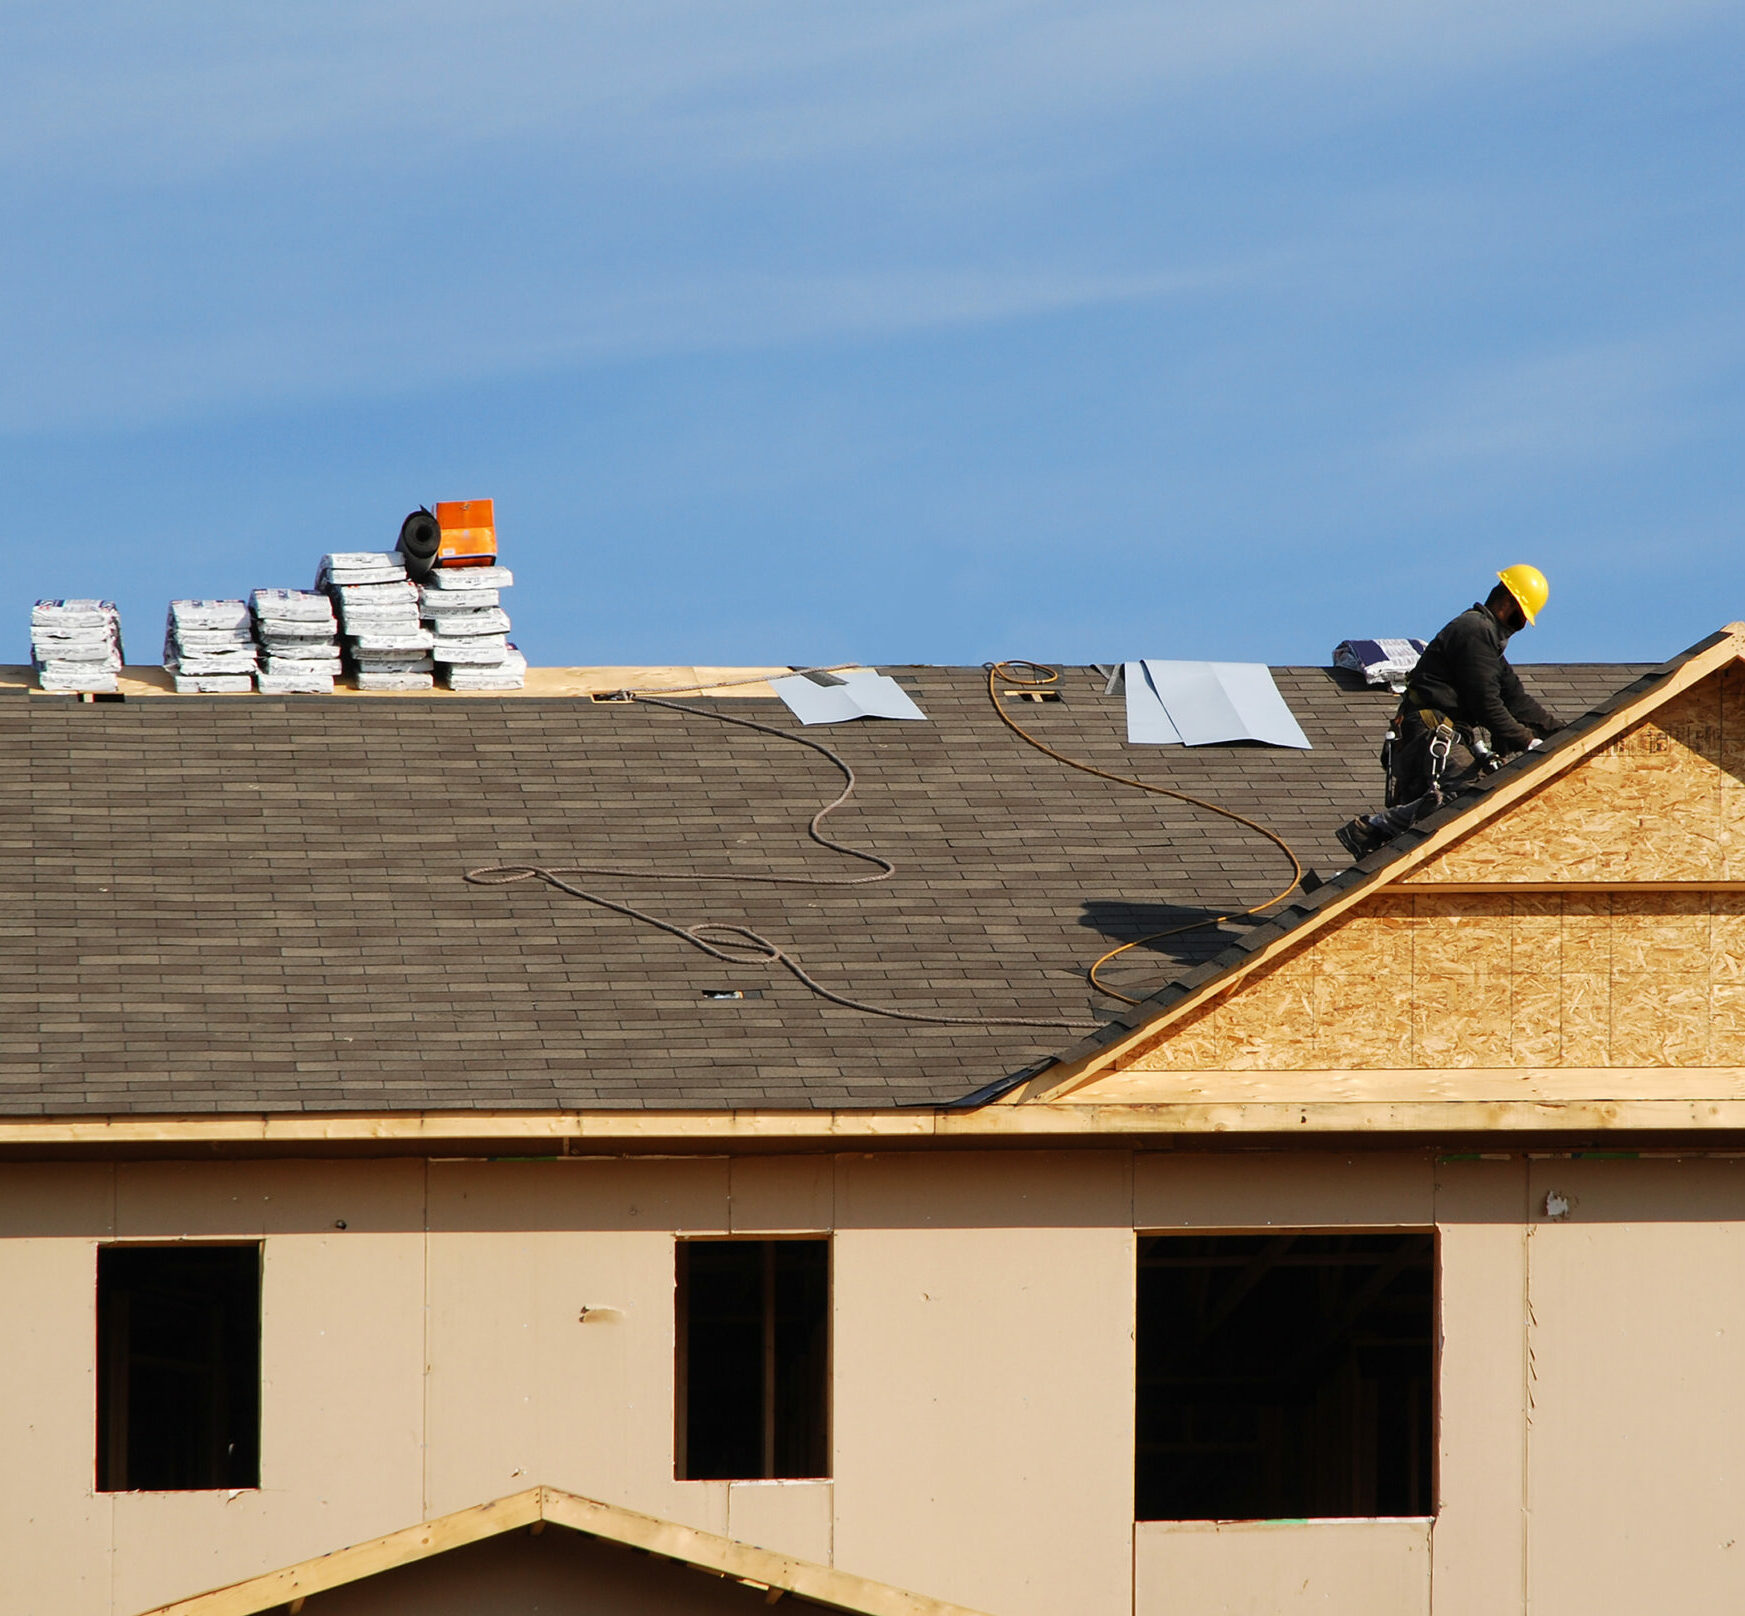 Discover expert tips on Residential Roofing Replacement in our comprehensive guide. Make your home safe and stylish today!